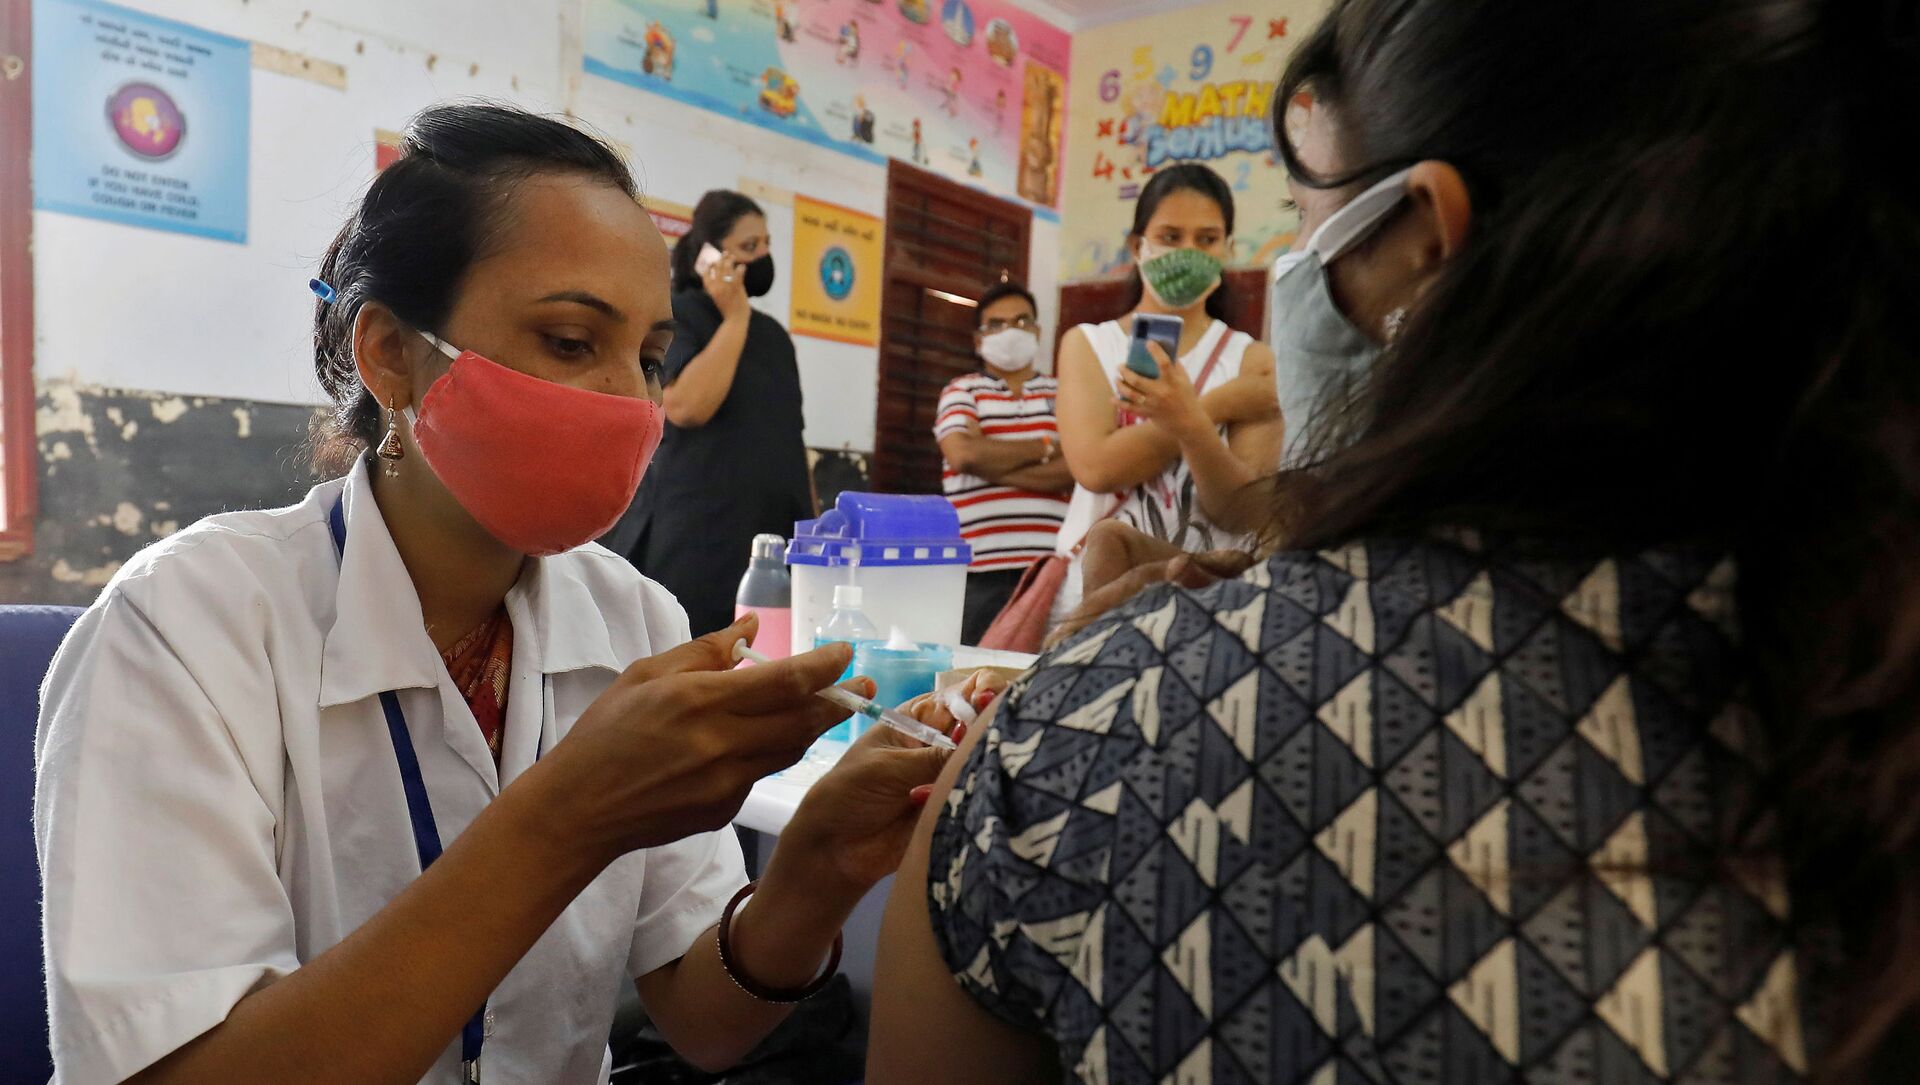 A healthcare worker gives a dose of COVISHIELD, a coronavirus disease (COVID-19) vaccine manufactured by Serum Institute of India, to a woman inside a classroom of a school, which has been converted into a temporary vaccination centre, in Ahmedabad, India, May 1, 2021 - Sputnik International, 1920, 10.07.2021